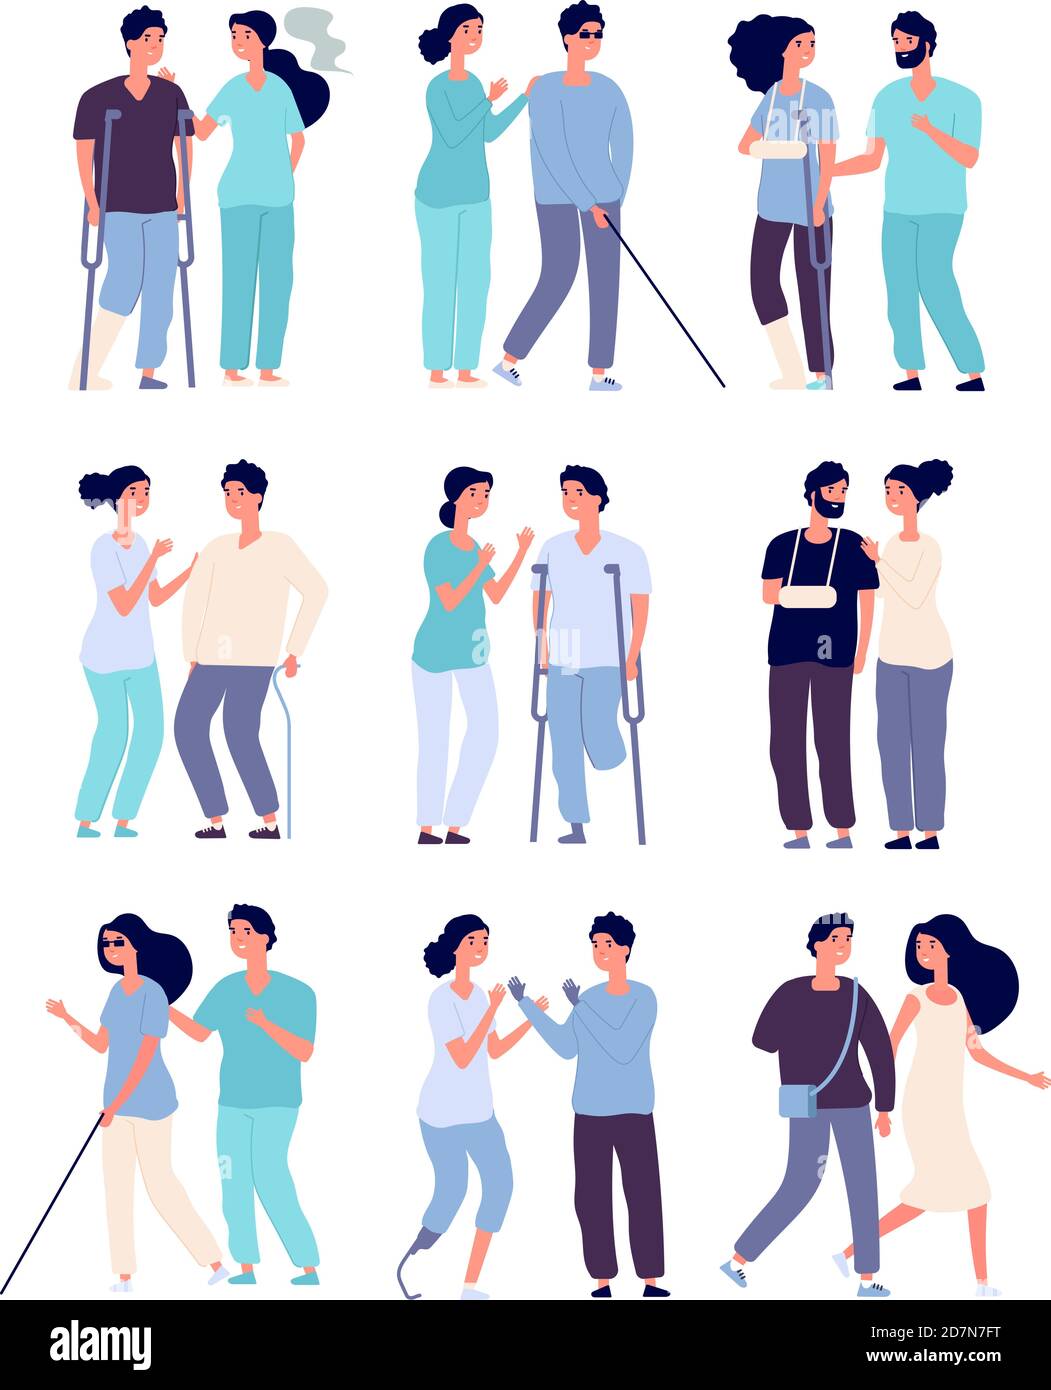 Disabled people and assistants. persons in wheelchair, men with crutches and prosthesis with nurses vector disabilities characters. Disabled and handicapped people illustration Stock Vector